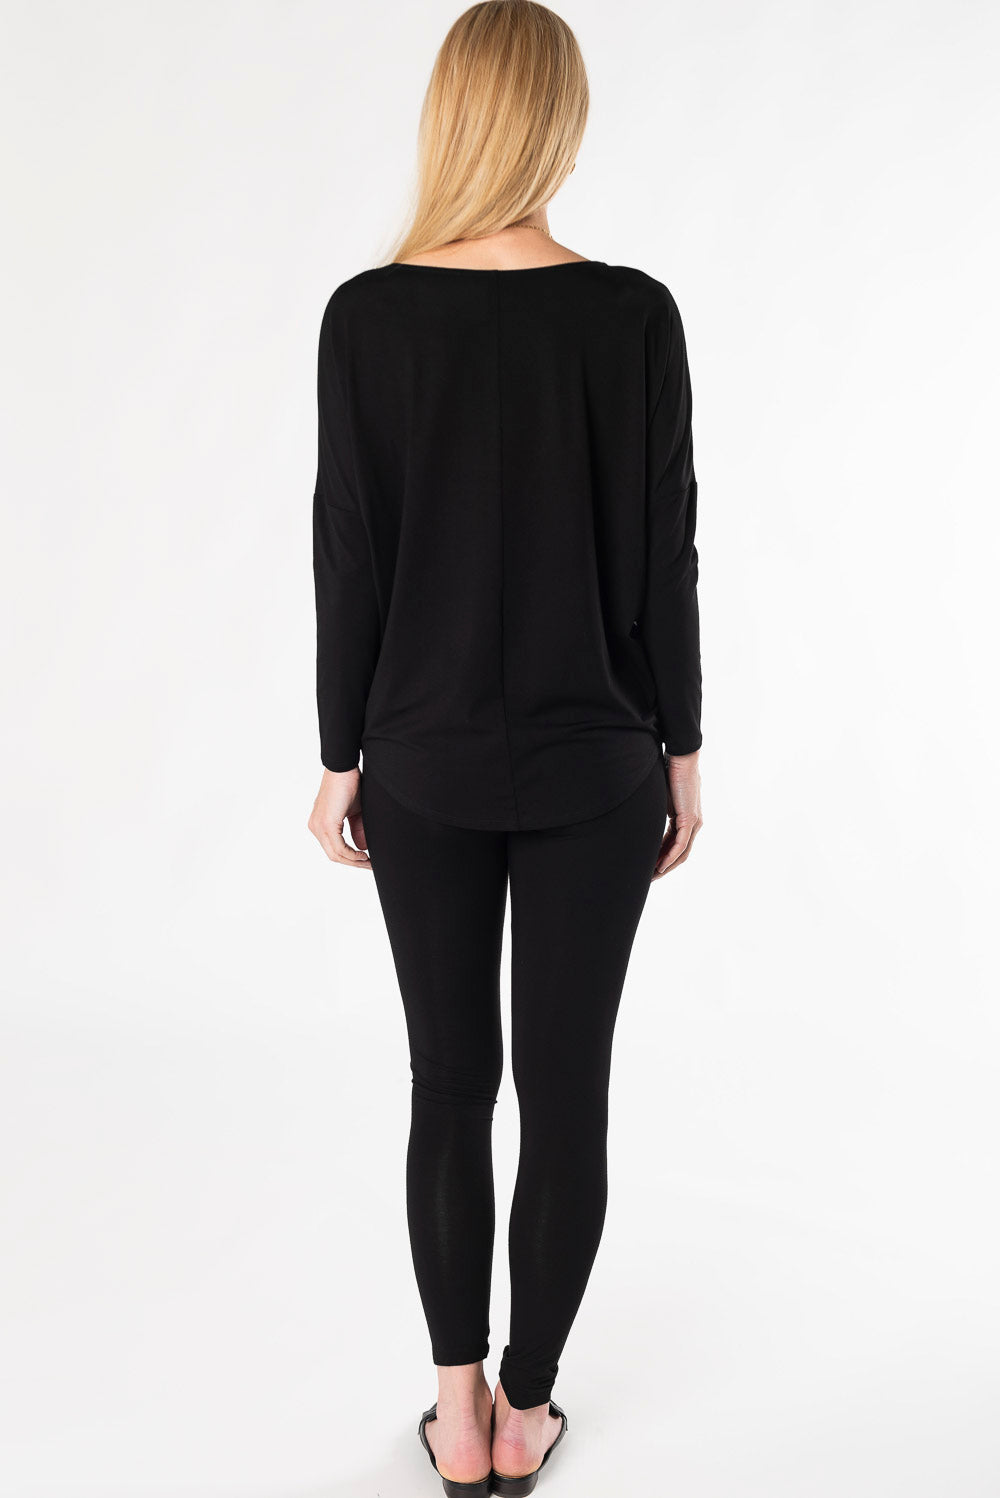 Bamboo batwing long sleeve boat neck top - black